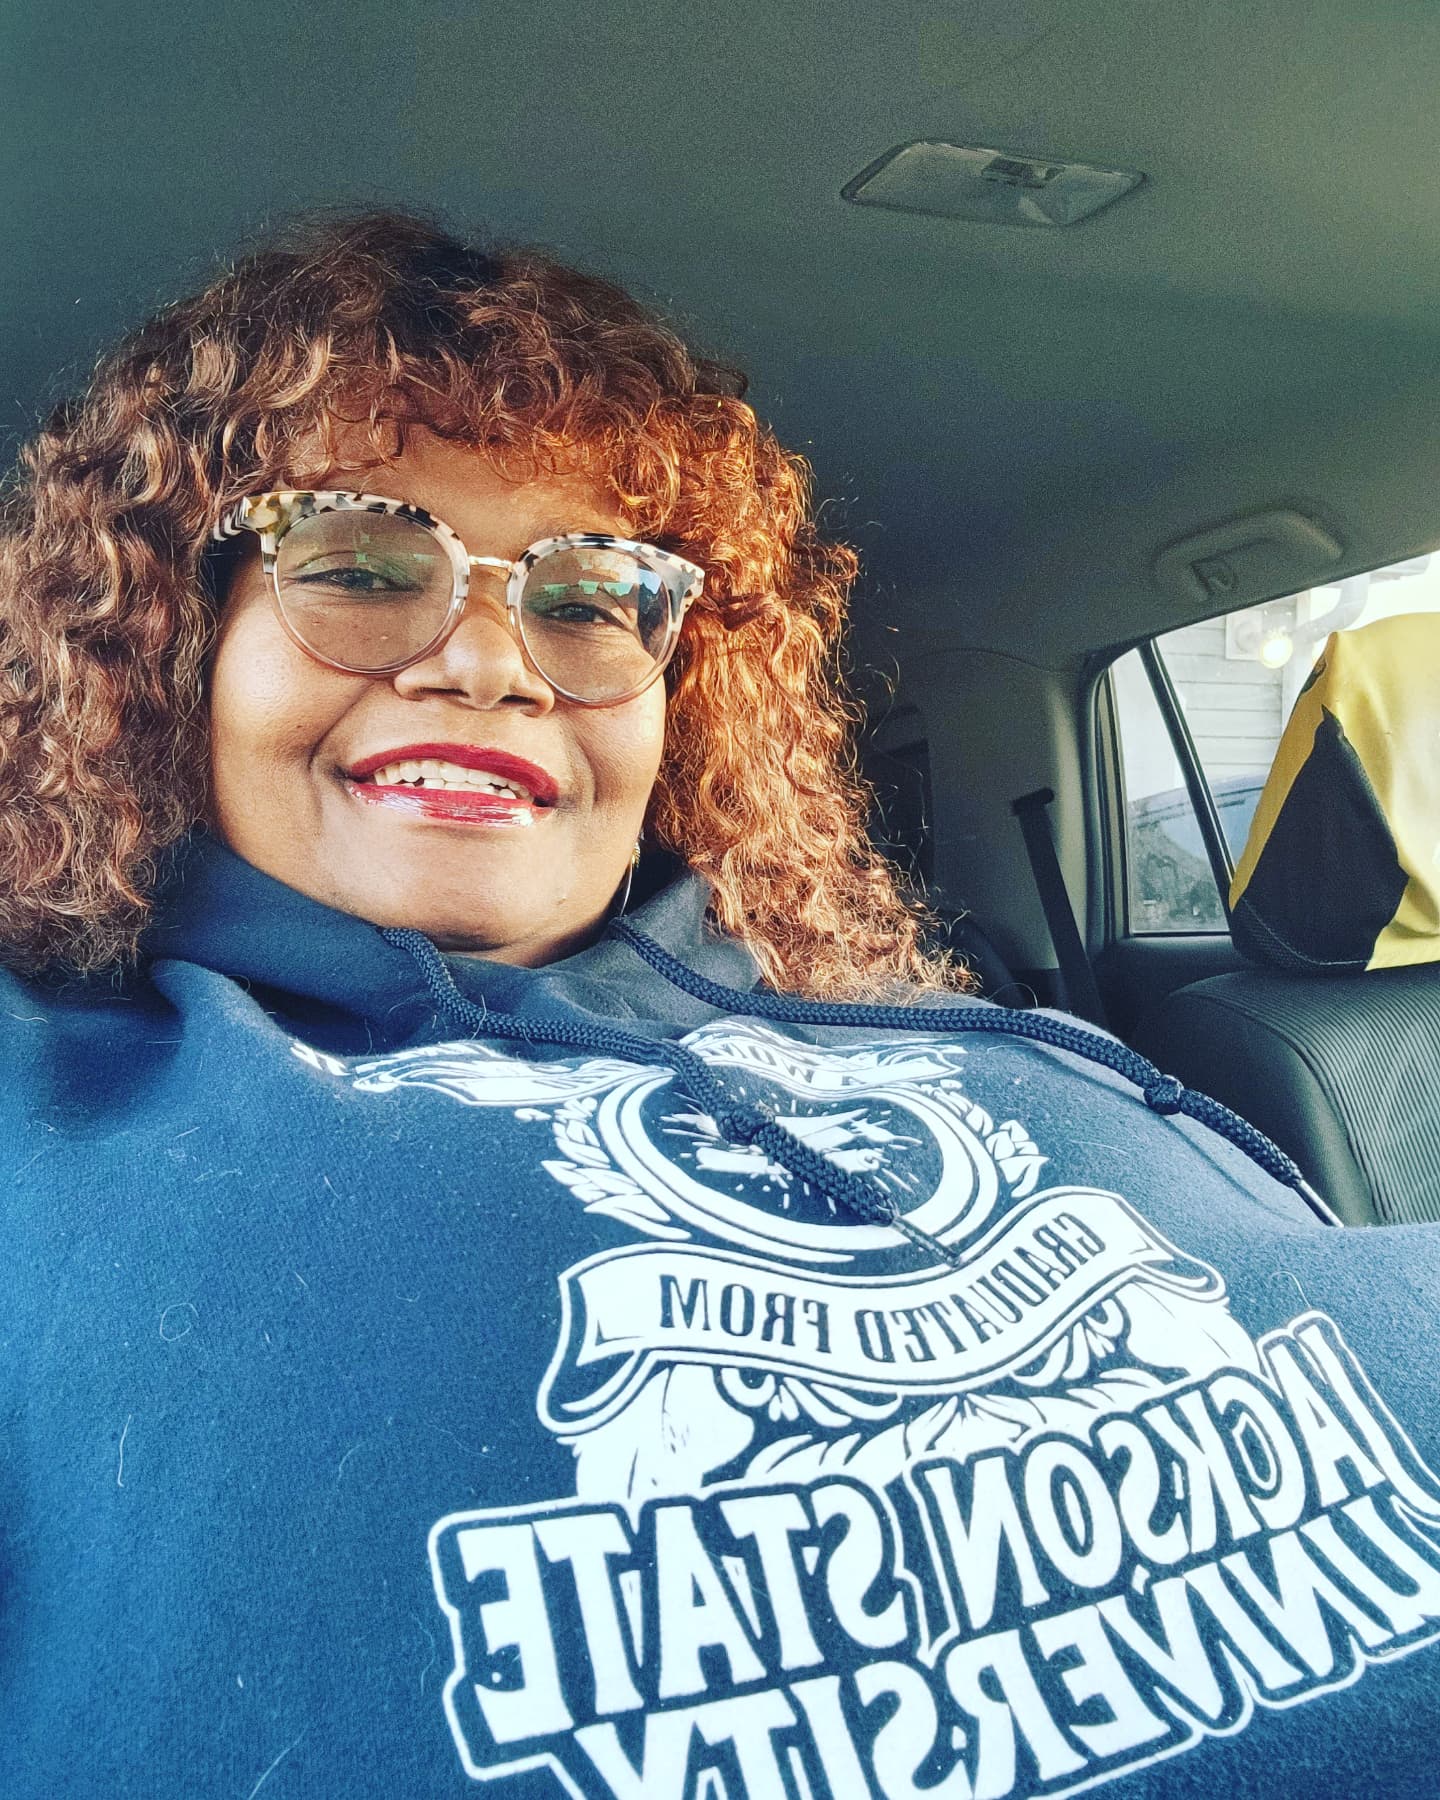 Tw Pornstars 1 Pic Mz Norma Stitz Twitter Good Morning All Whos Hanging Out Early For 